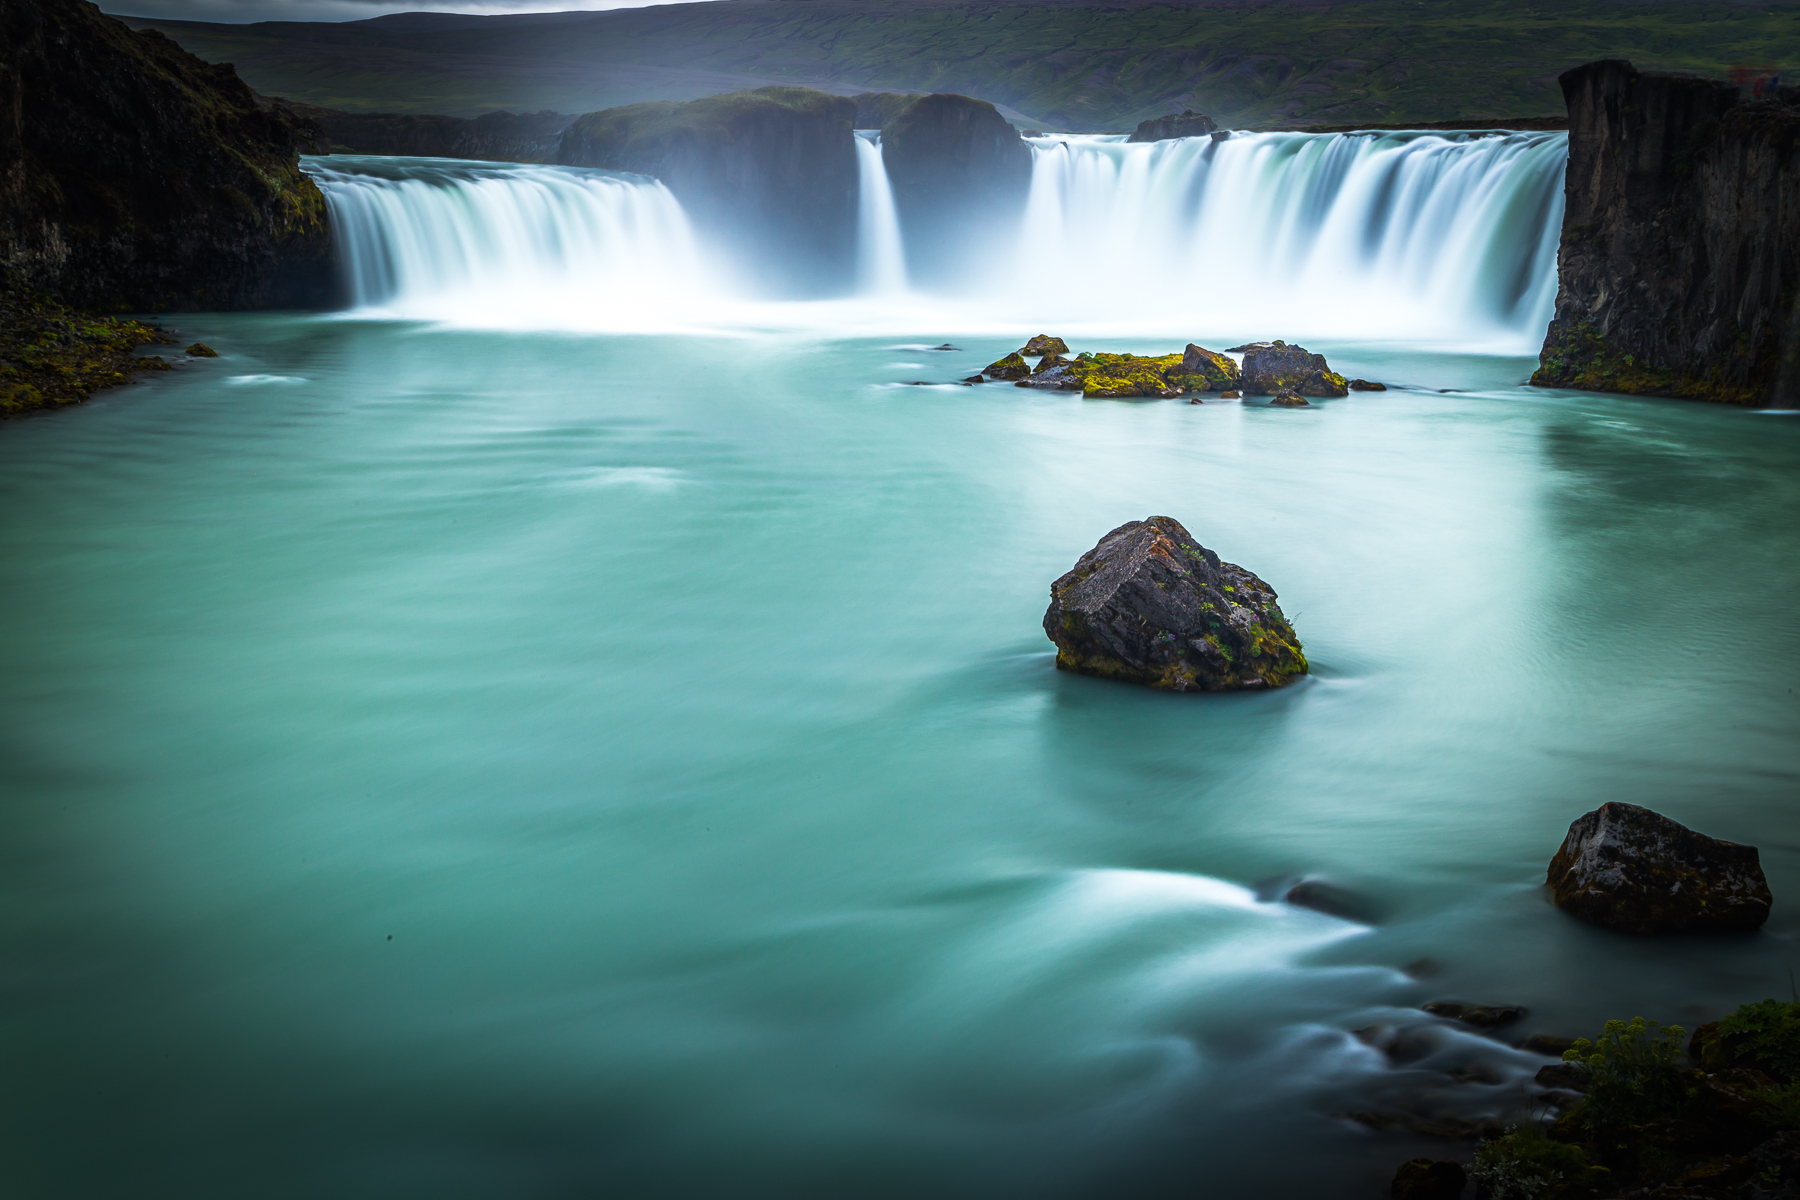 Godafoss, or waterfall of the Gods, is located on the Diamond circle in Iceland